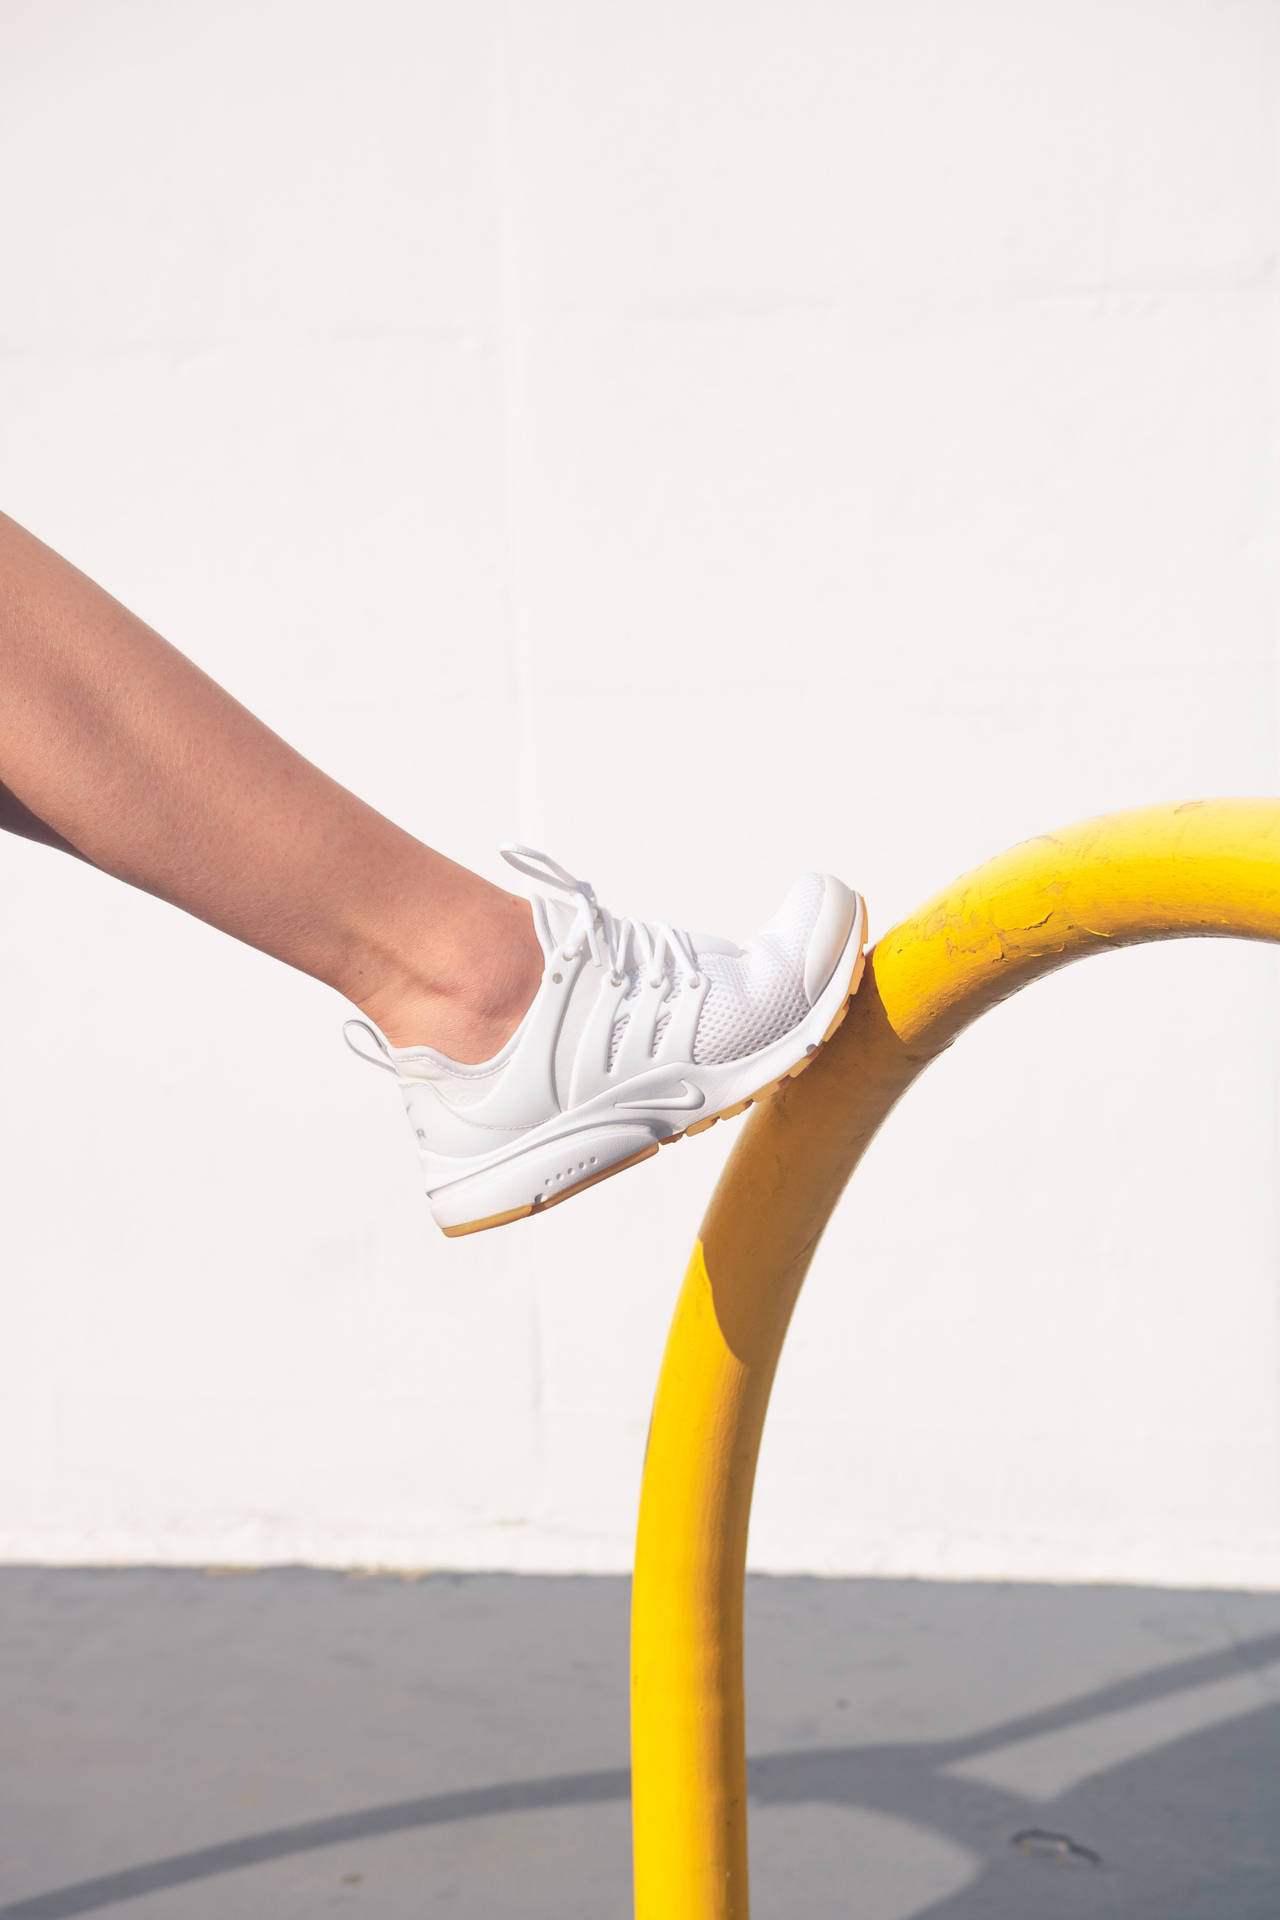 White Rubber Shoes In Yellow Tube